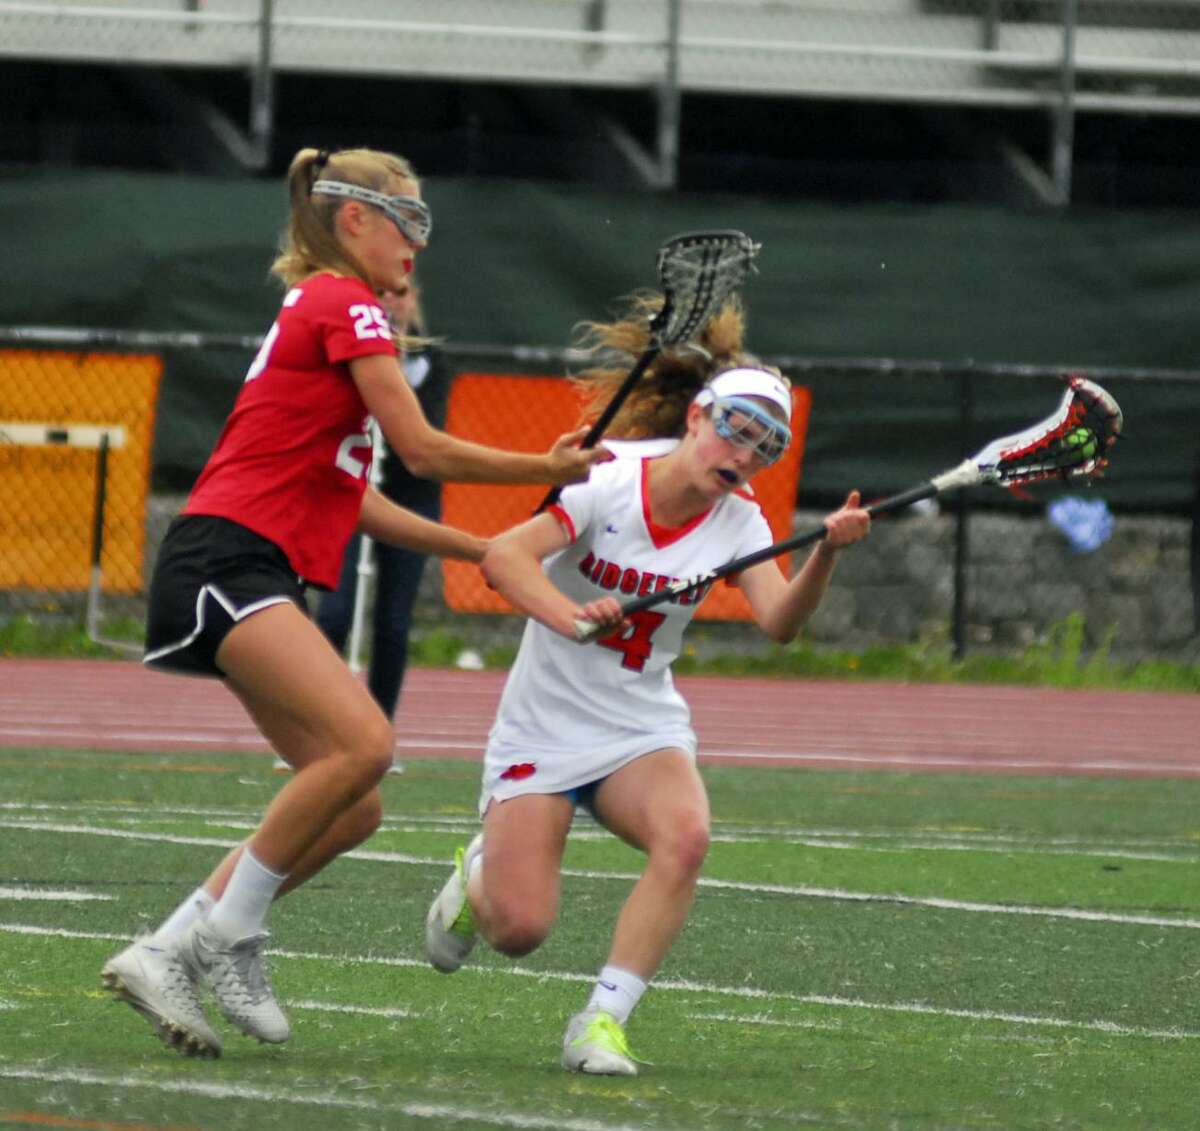 Action from New Canaan's 16-10 win over Ridgefield on Tuesday.